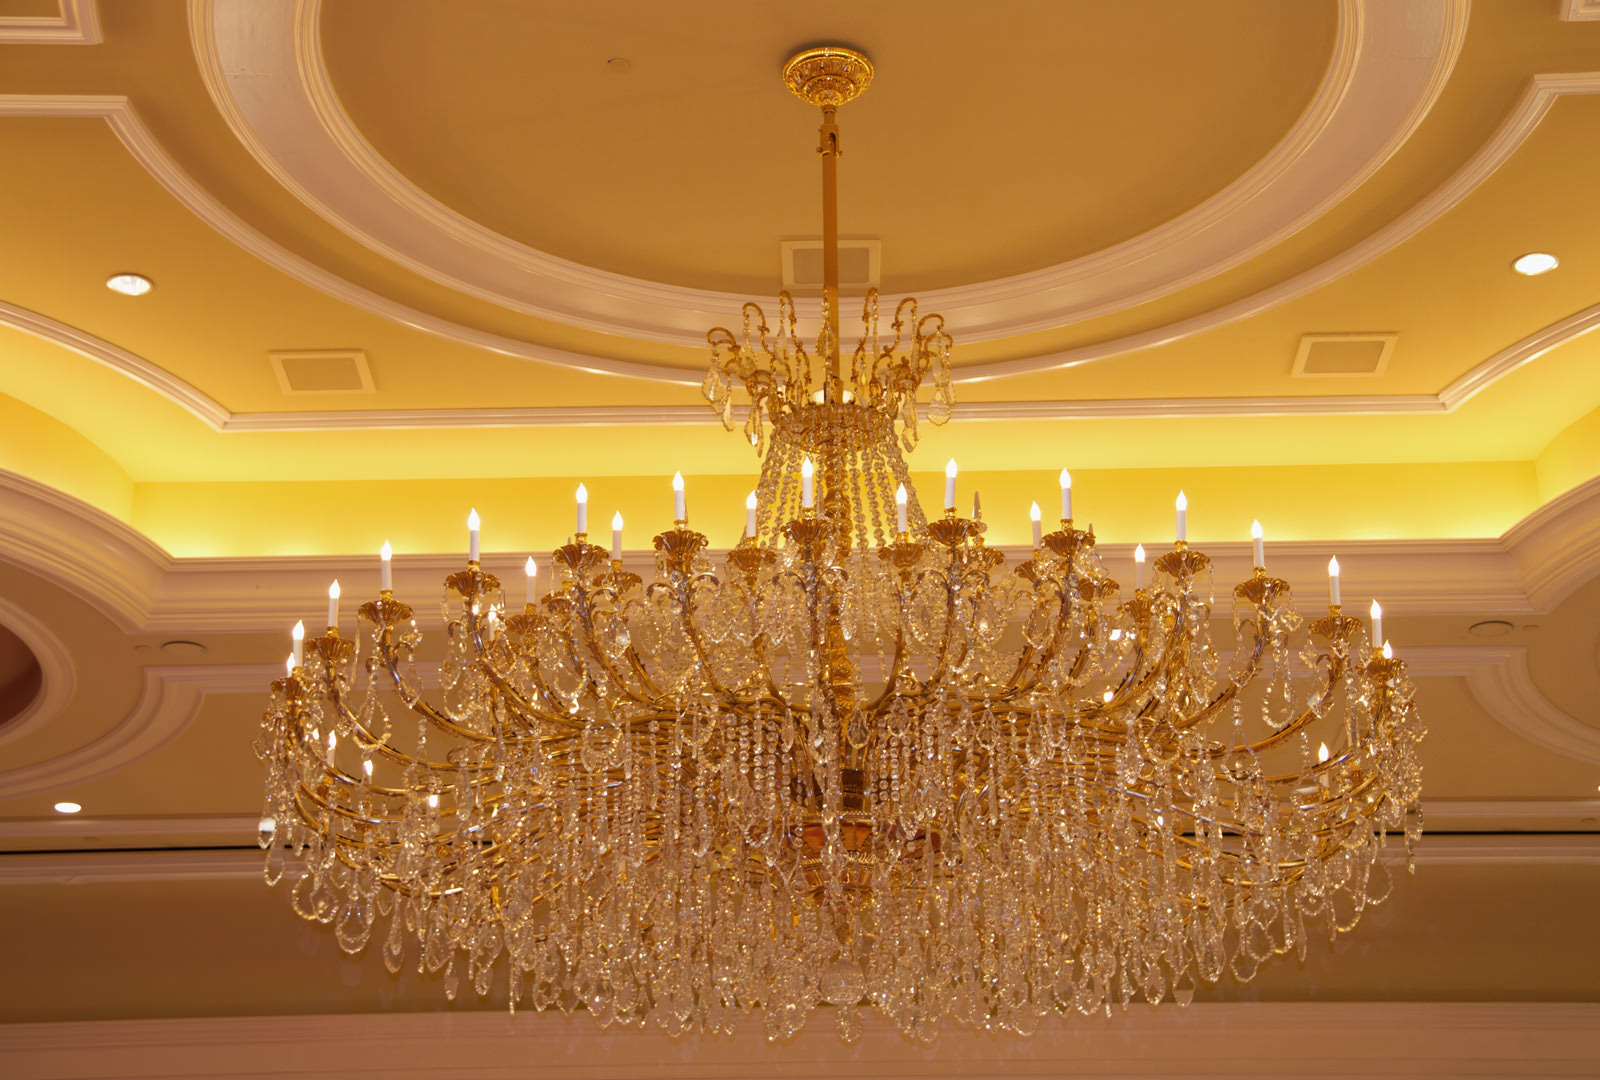 The Grand America;'s Moscatelli Chandelier